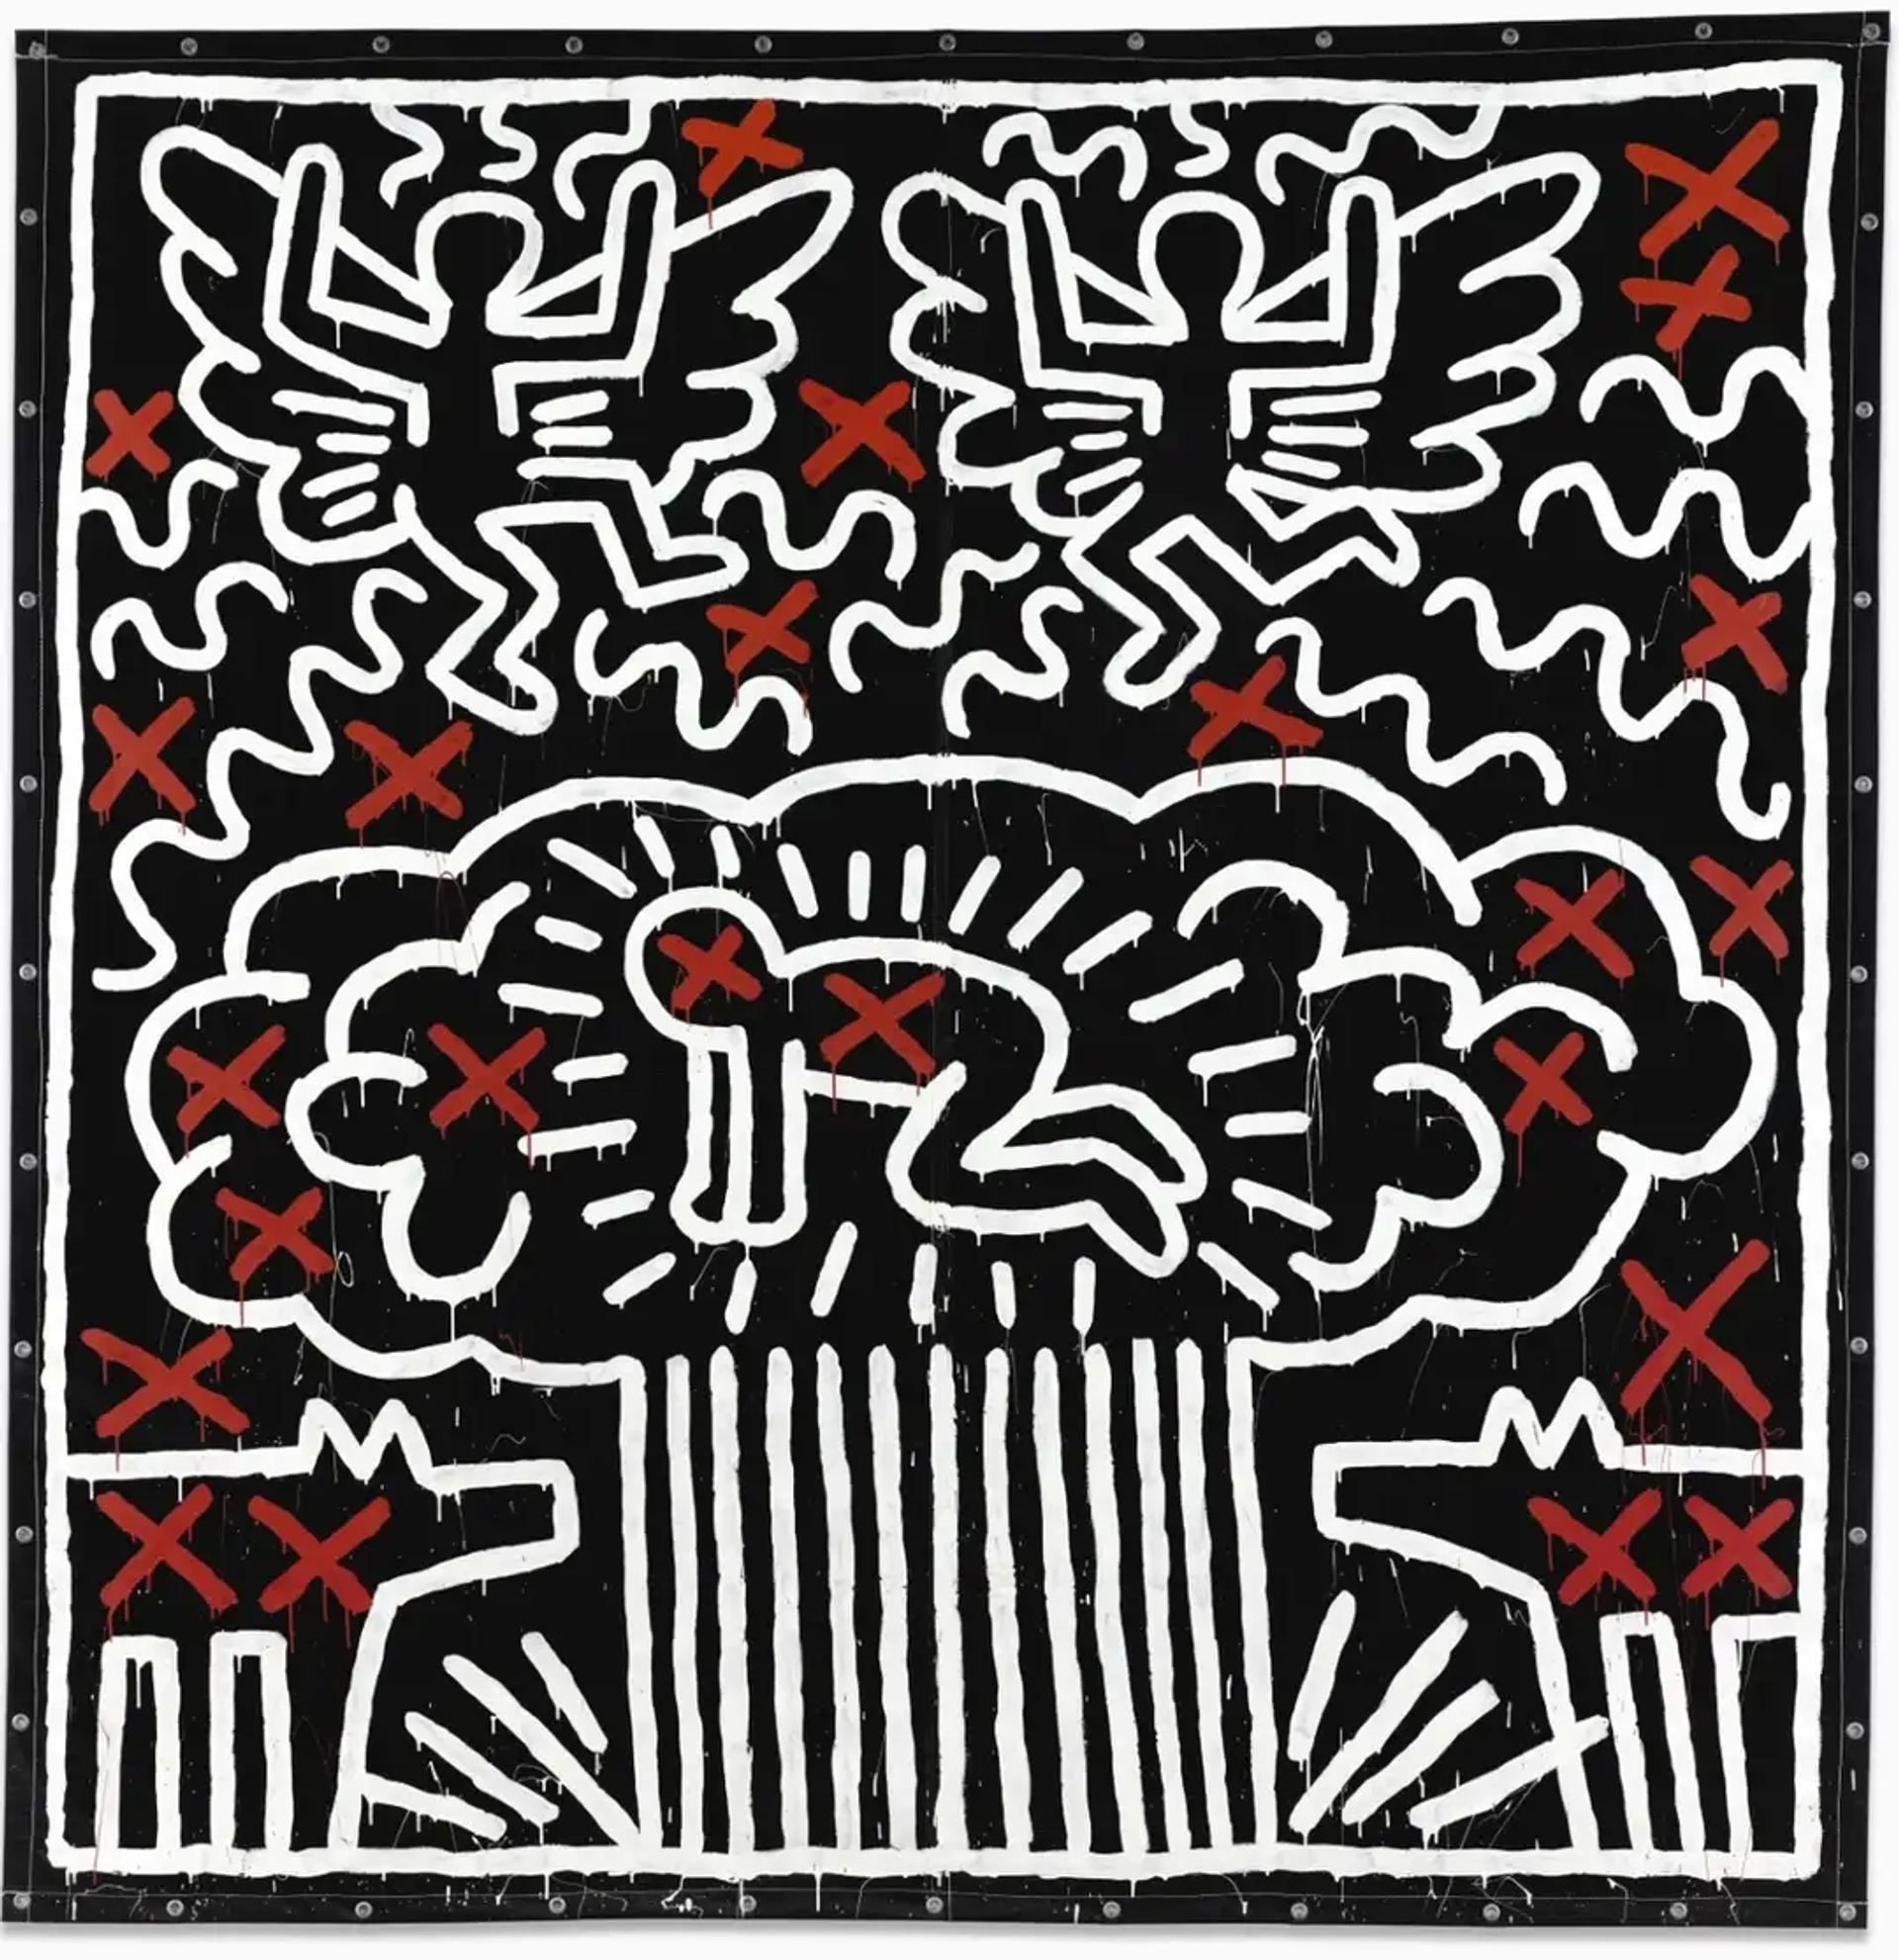 Keith Haring’s Untitled. A Pop Art painting of white outlined characters with red “x” marks across a black background. 